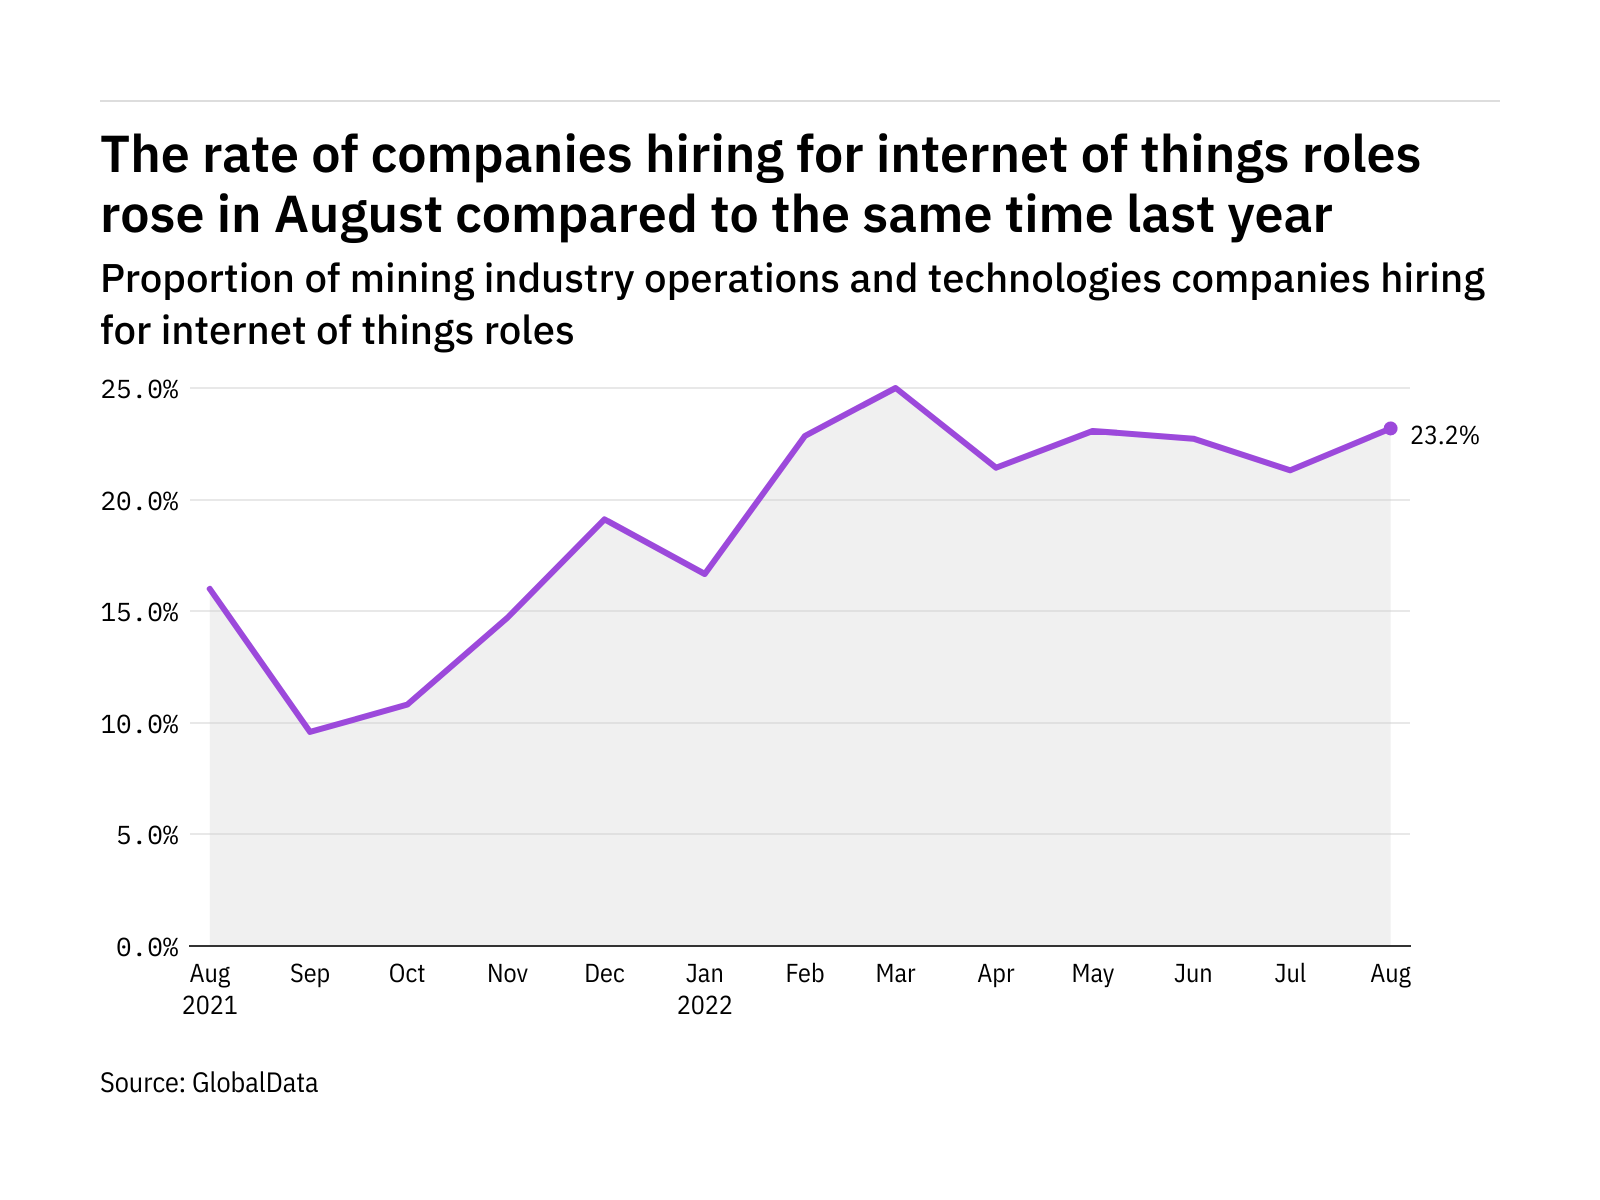 Internet of things hiring levels in the mining industry rose in August 2022